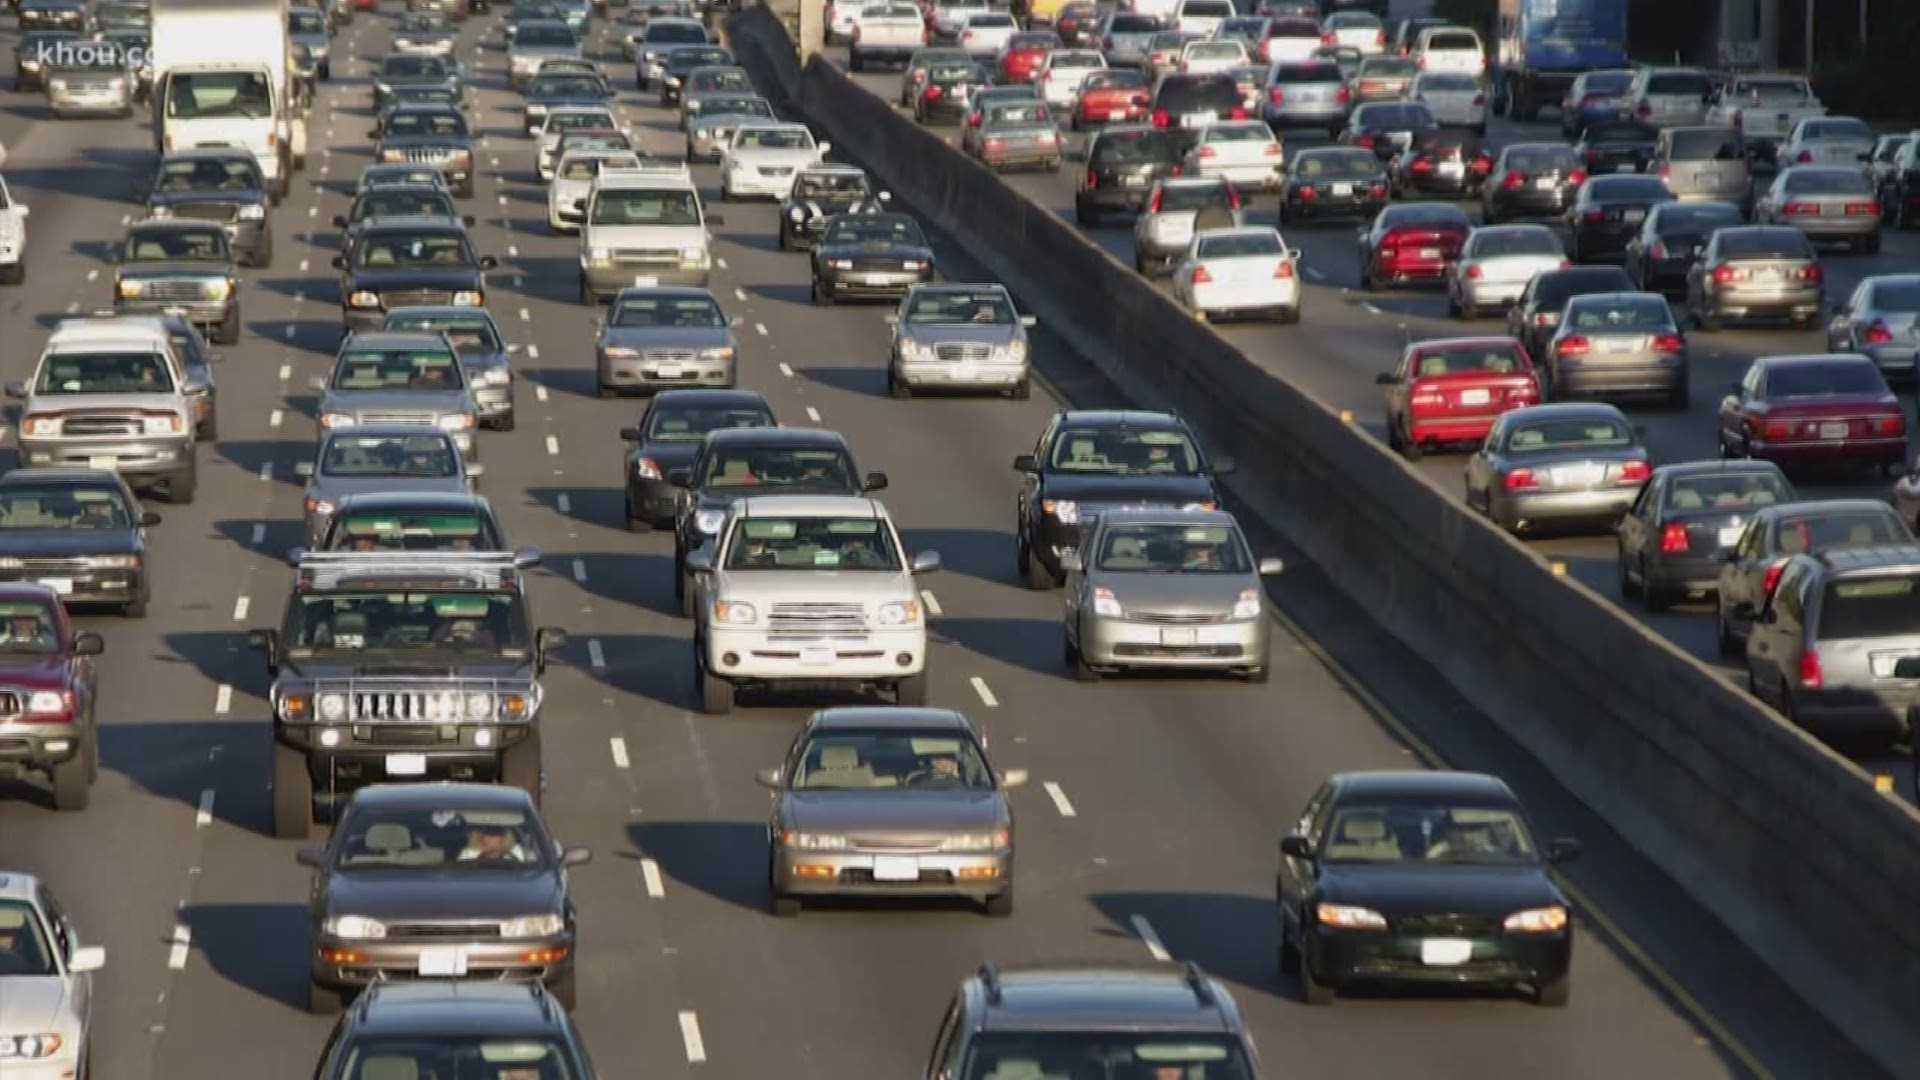 Houston drivers spent 75 hours stuck in traffic during a recent year and lost nearly $1,400 in wasted time and gas, according to a new study by the Texas A&M Transportation Institute.